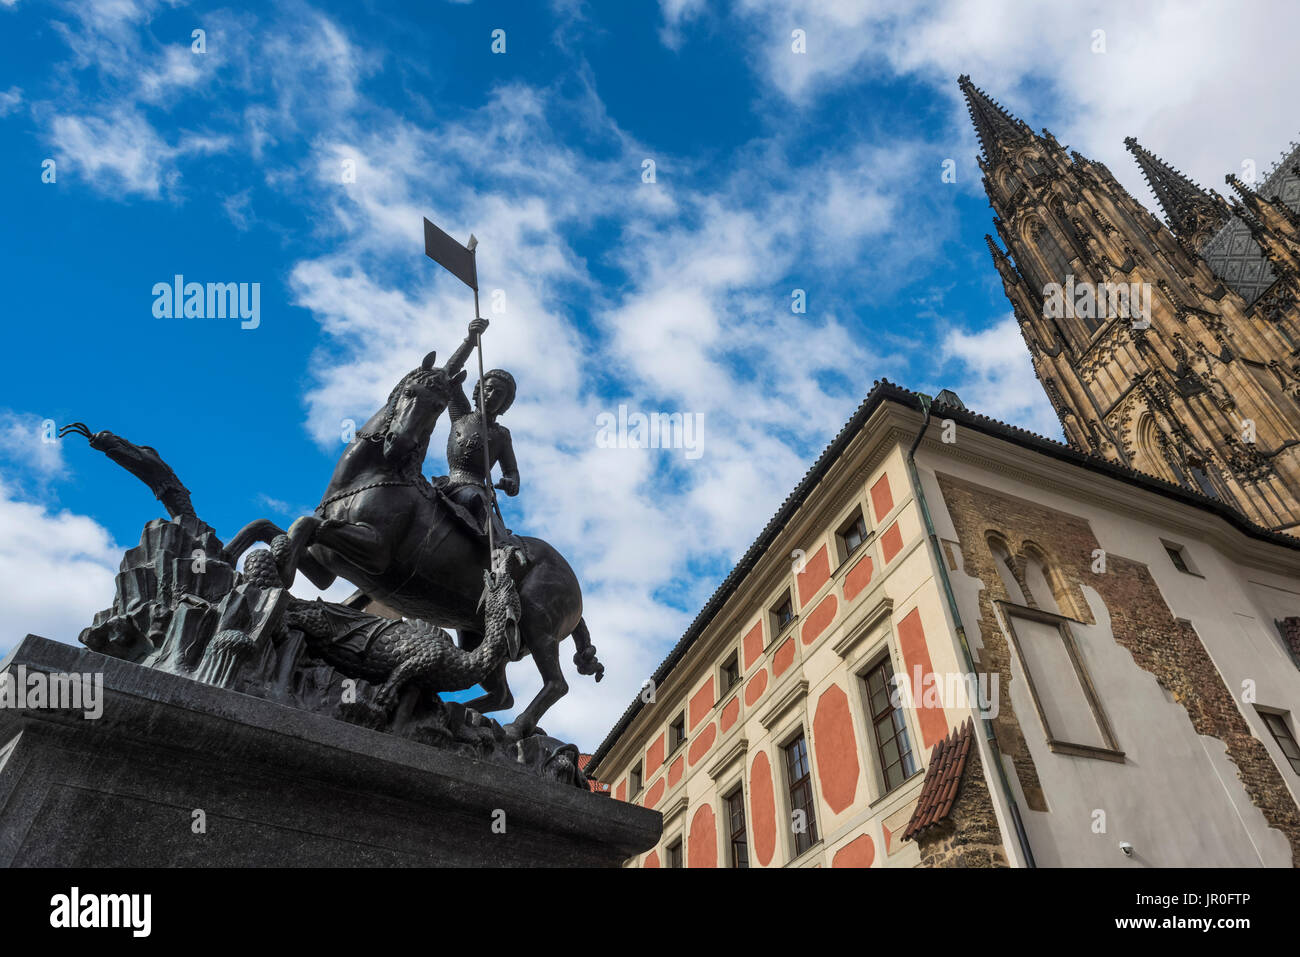 Low Angle View Of St. Vitus Cathedral, Prague Castle And A Statue Of A Rider On A Horse; Prague, Czechia Stock Photo